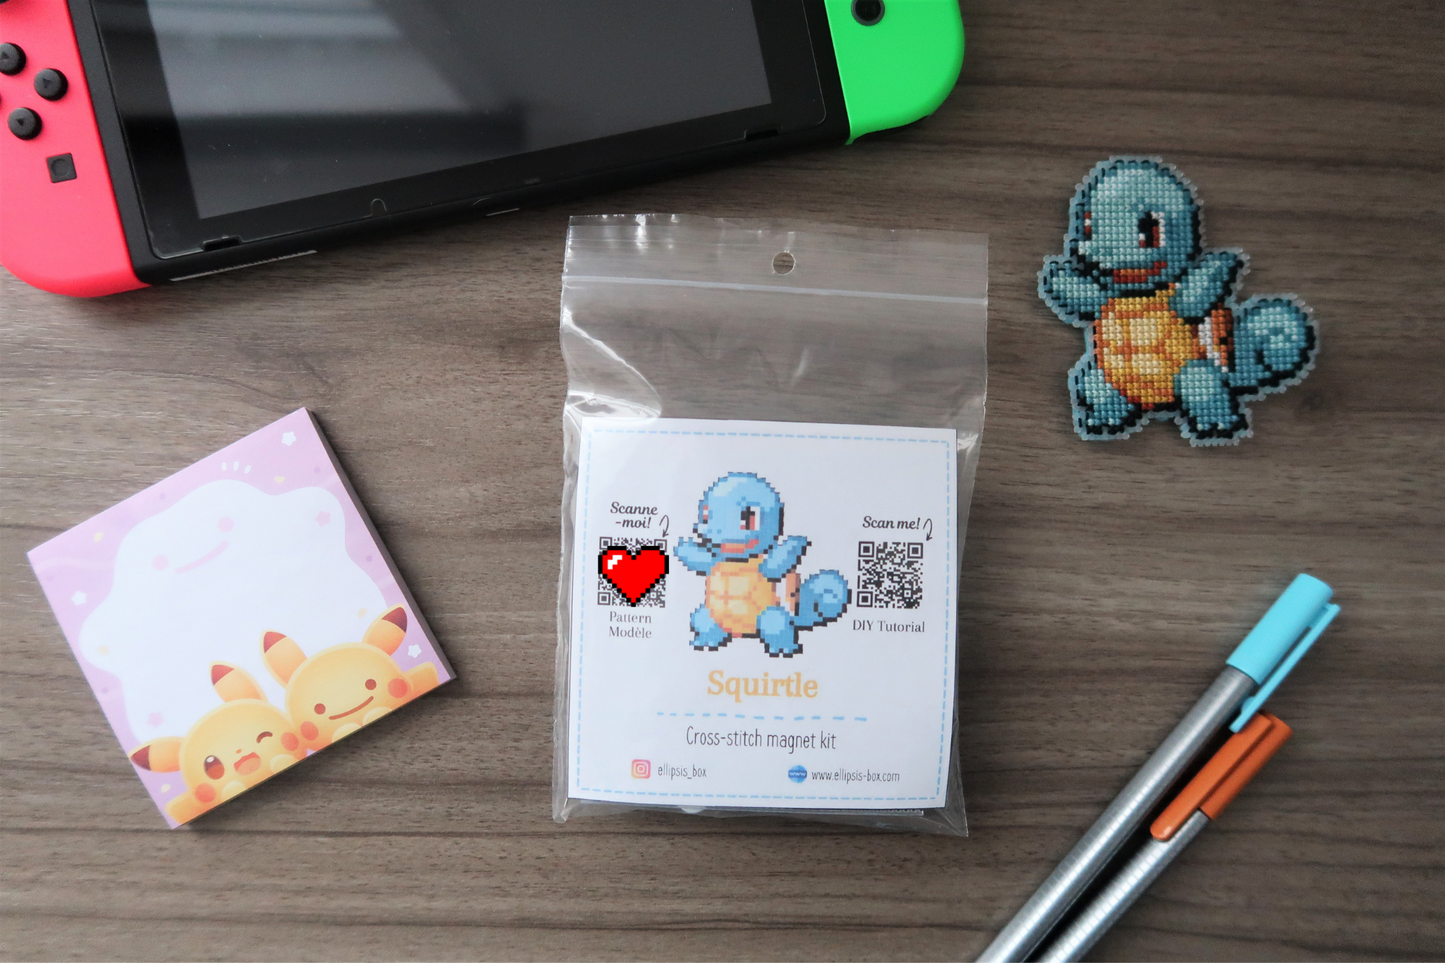 Squirtle from Pokemon - Cross stitch magnet kit